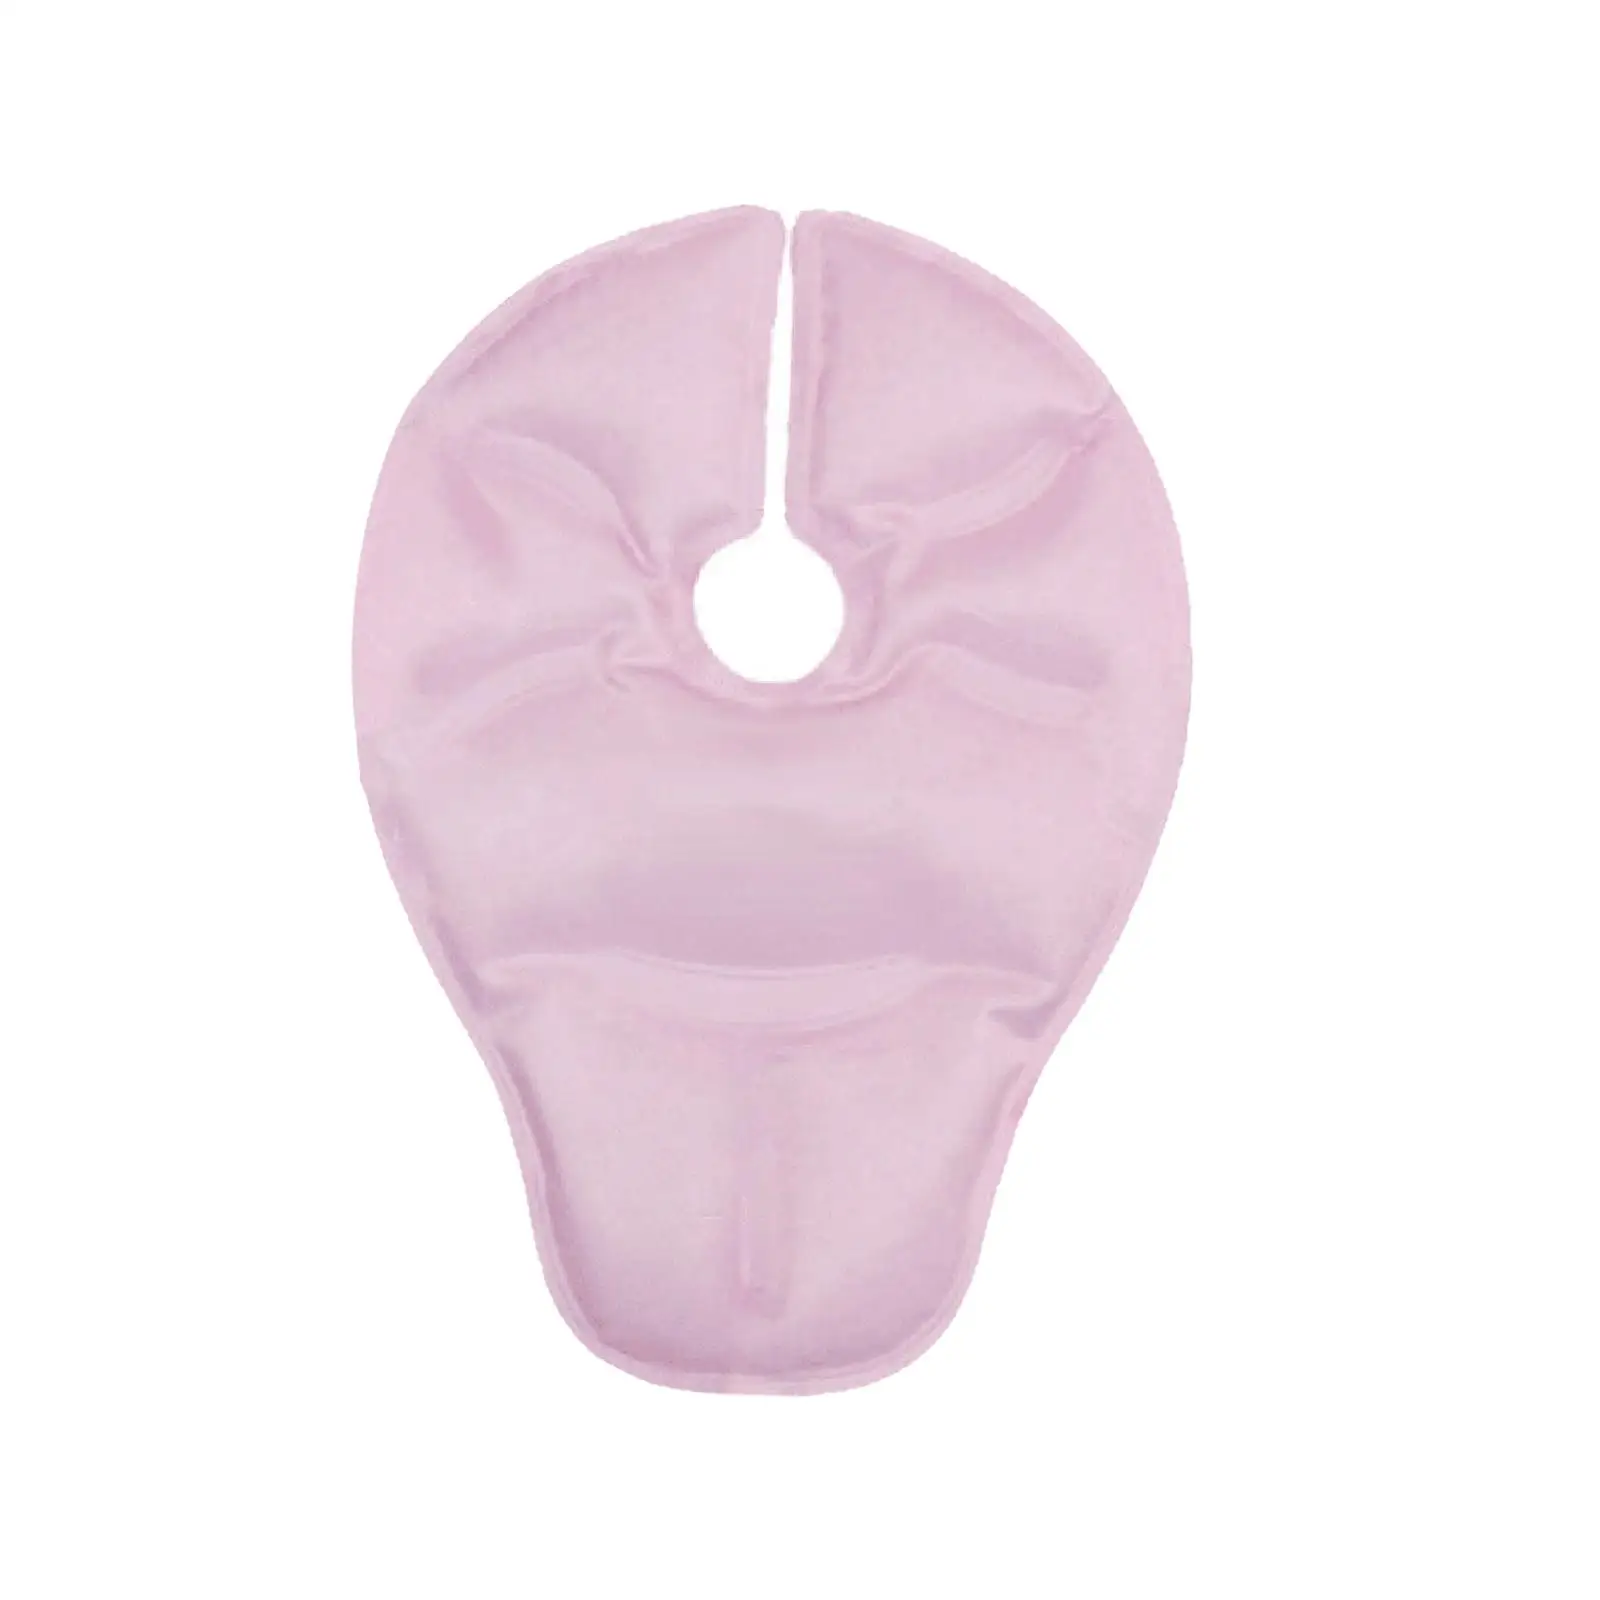 Breast Ice Packs Breast Pack for Sore Freezing Warm Compress